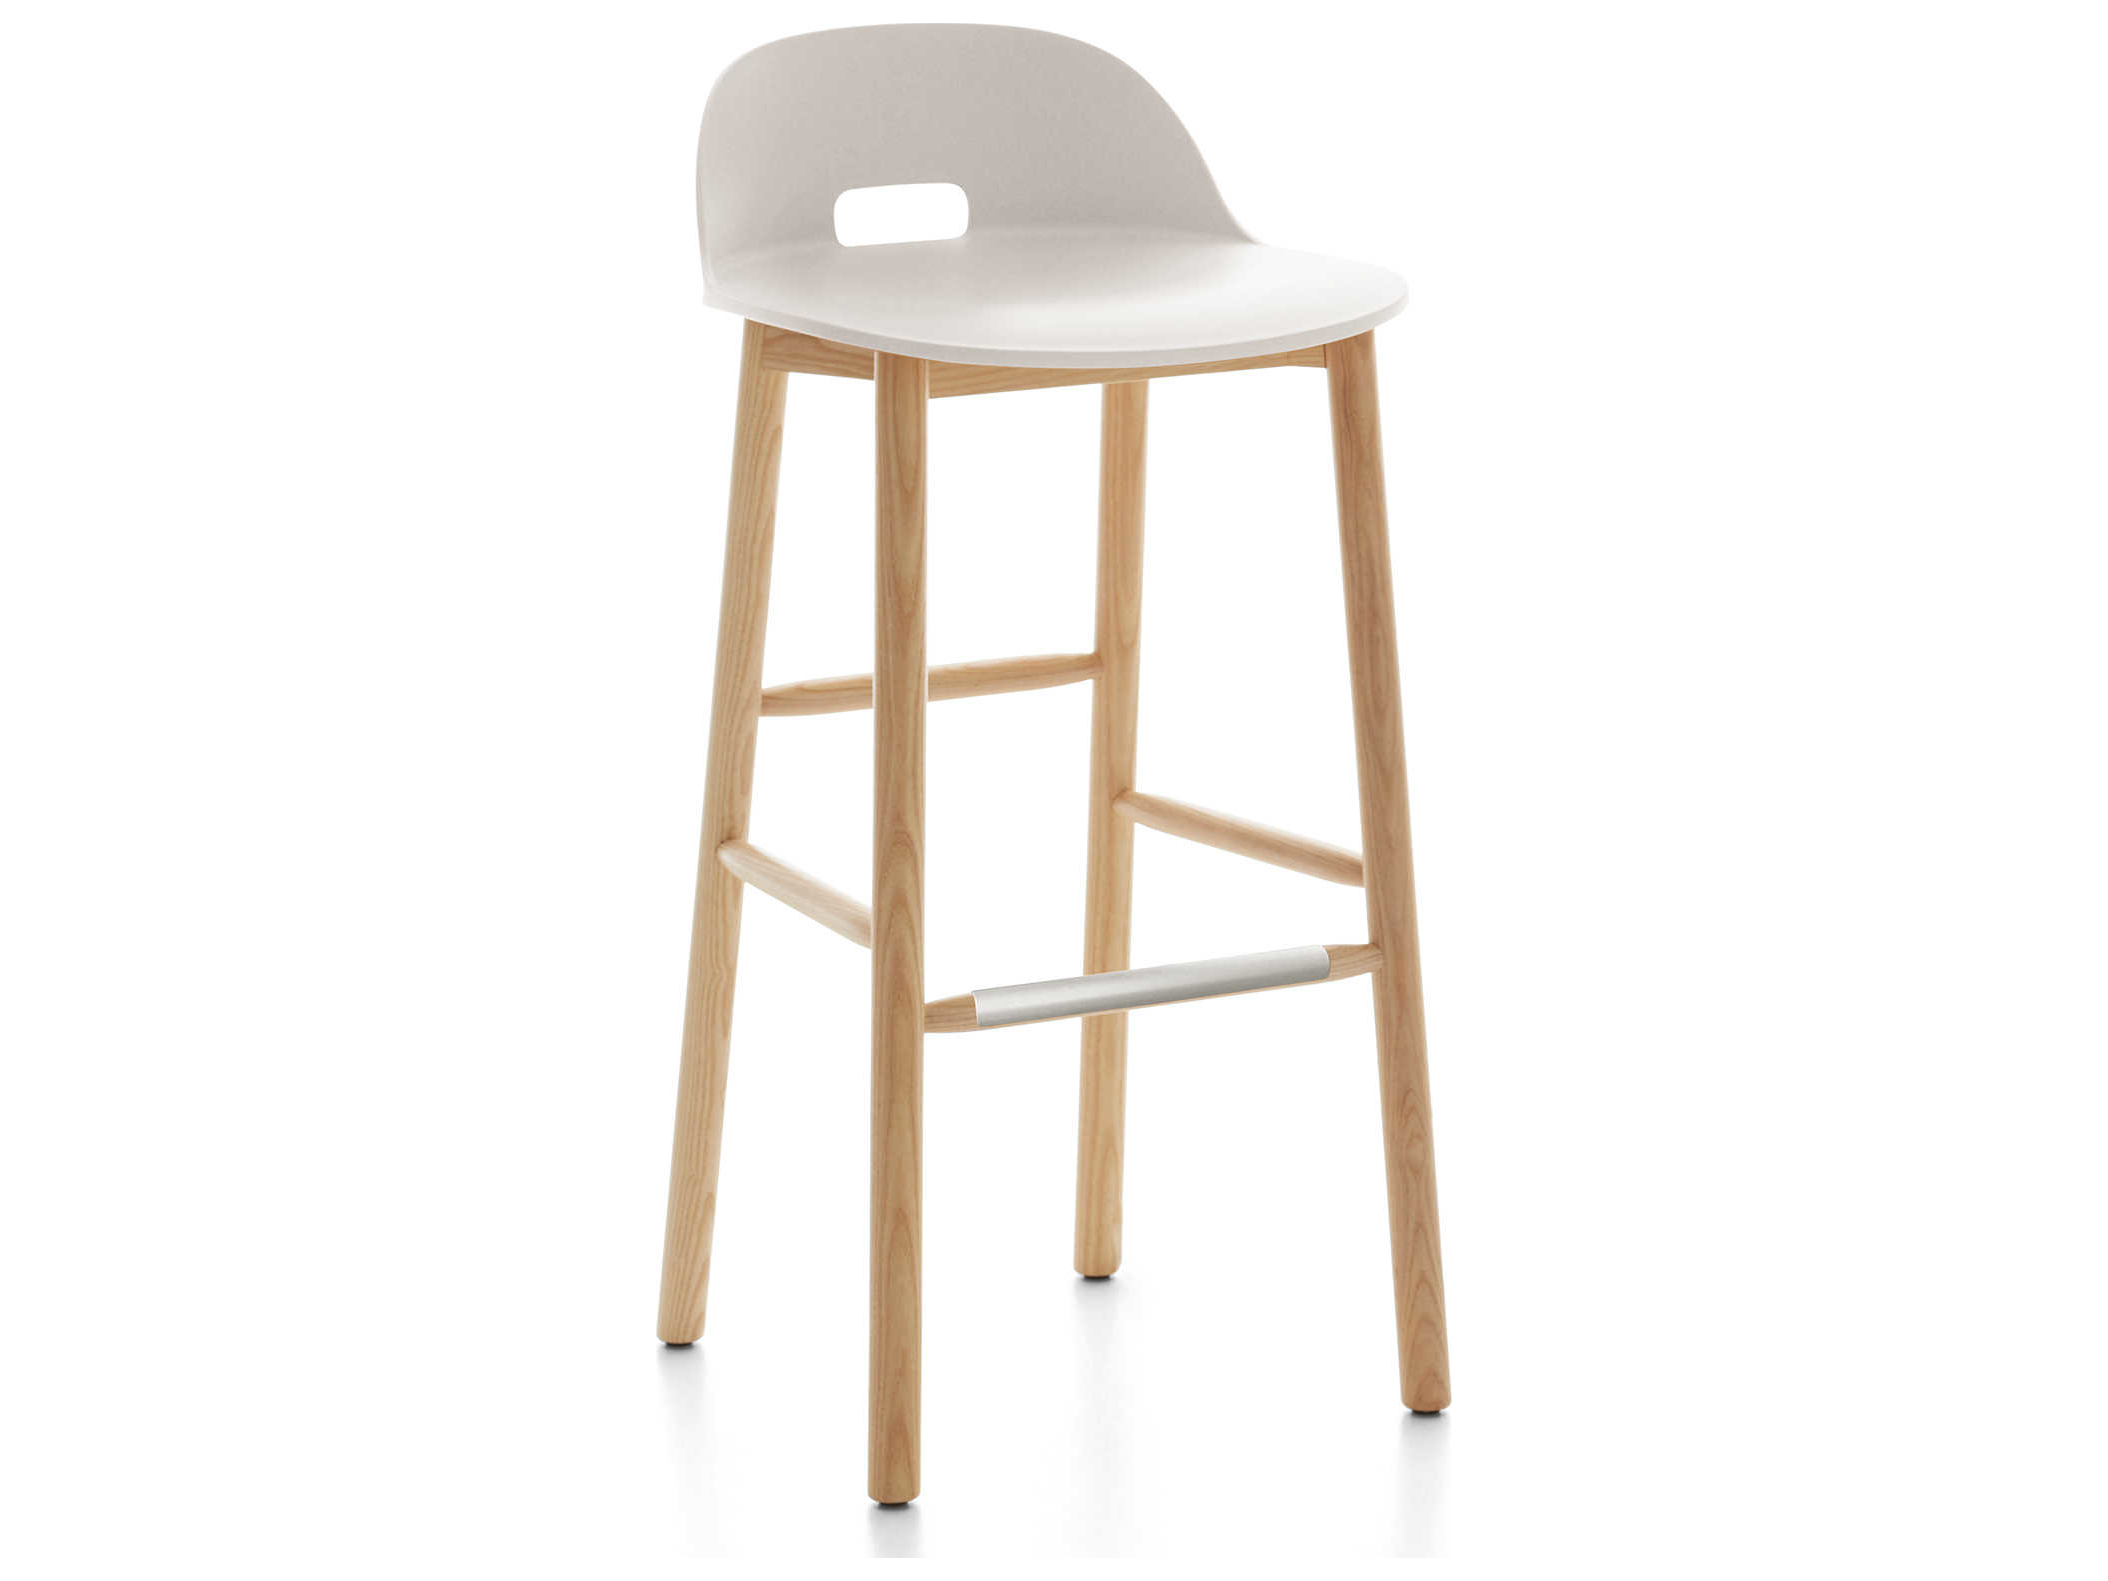 Emeco Outdoor Alfi Ash Wood Low Back, Outdoor Wooden Bar Stools With Backs